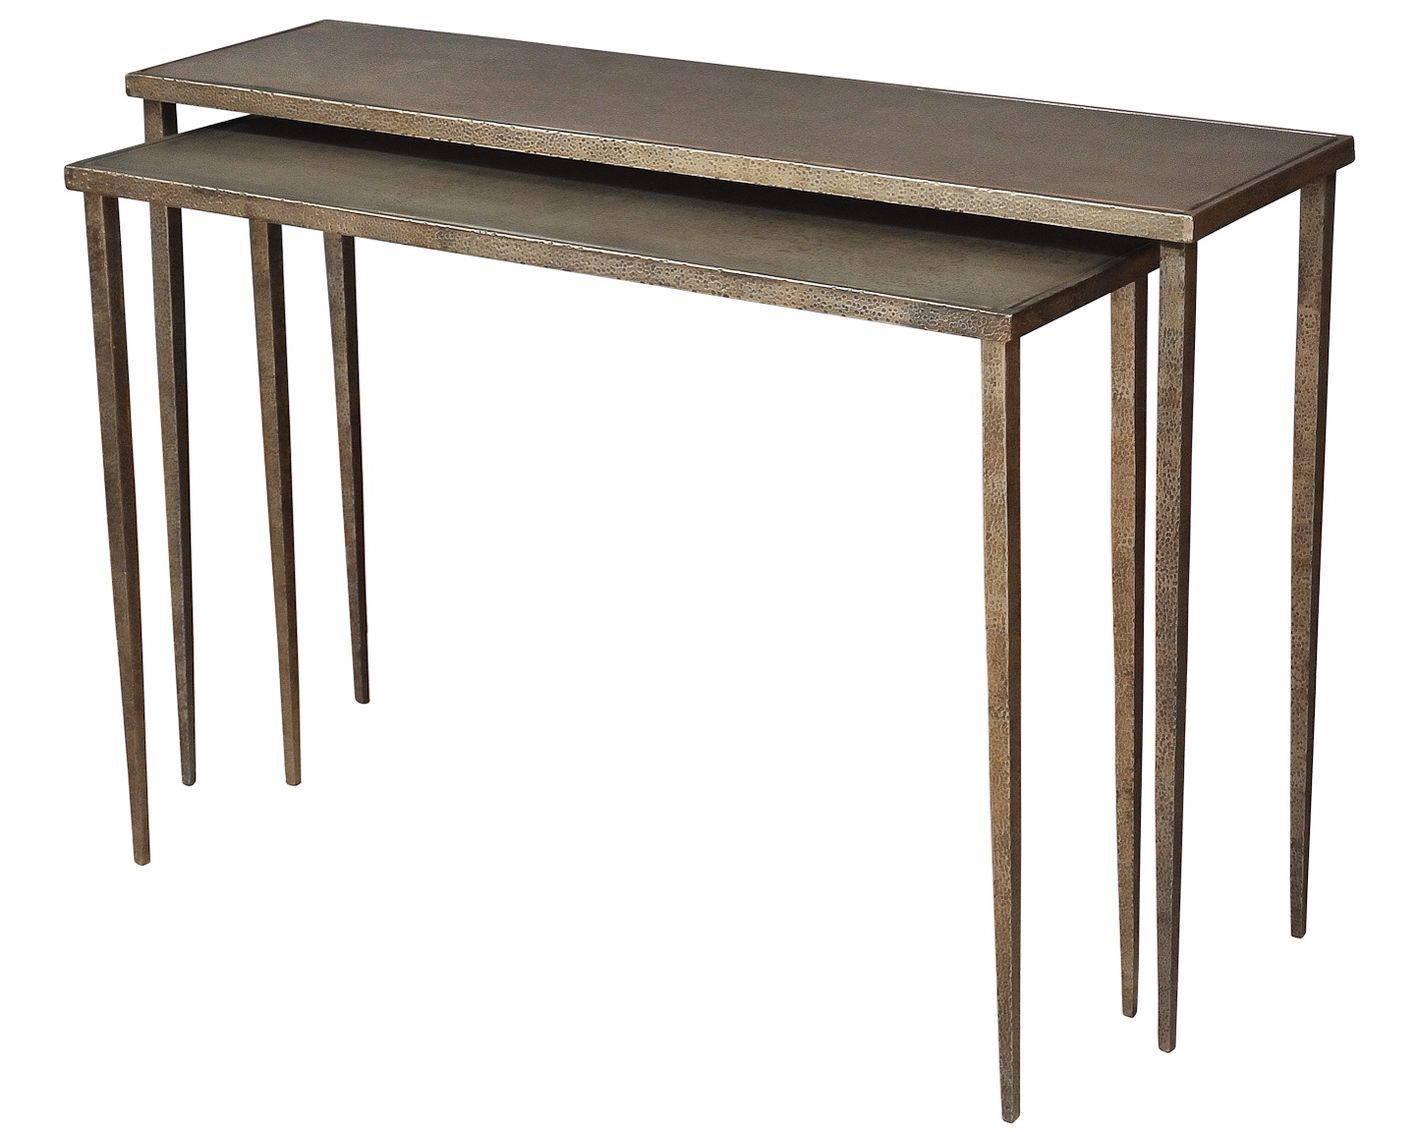 Hammered Sheet Metal Console Tables | My Designs | Pinterest Intended For Parsons Concrete Top &amp; Dark Steel Base 48x16 Console Tables (View 2 of 30)